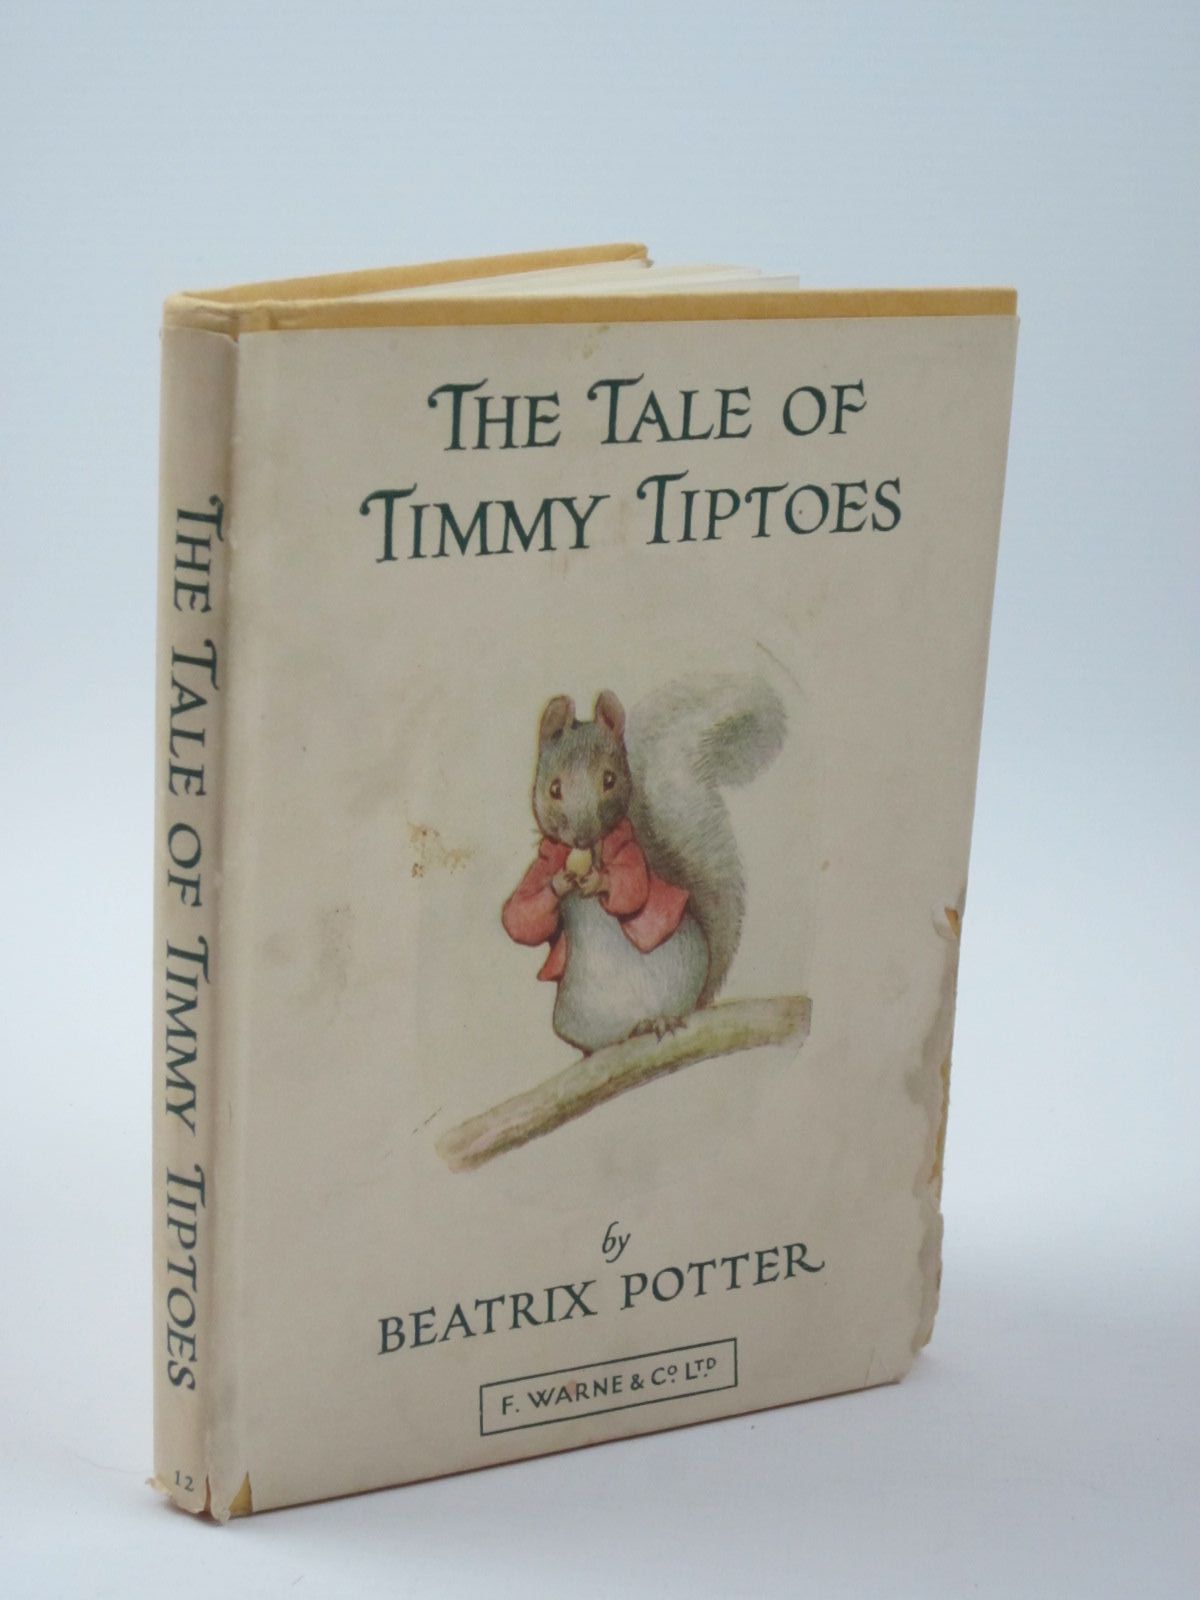 Photo of THE TALE OF TIMMY TIPTOES written by Potter, Beatrix illustrated by Potter, Beatrix published by Frederick Warne & Co Ltd. (STOCK CODE: 1309940)  for sale by Stella & Rose's Books